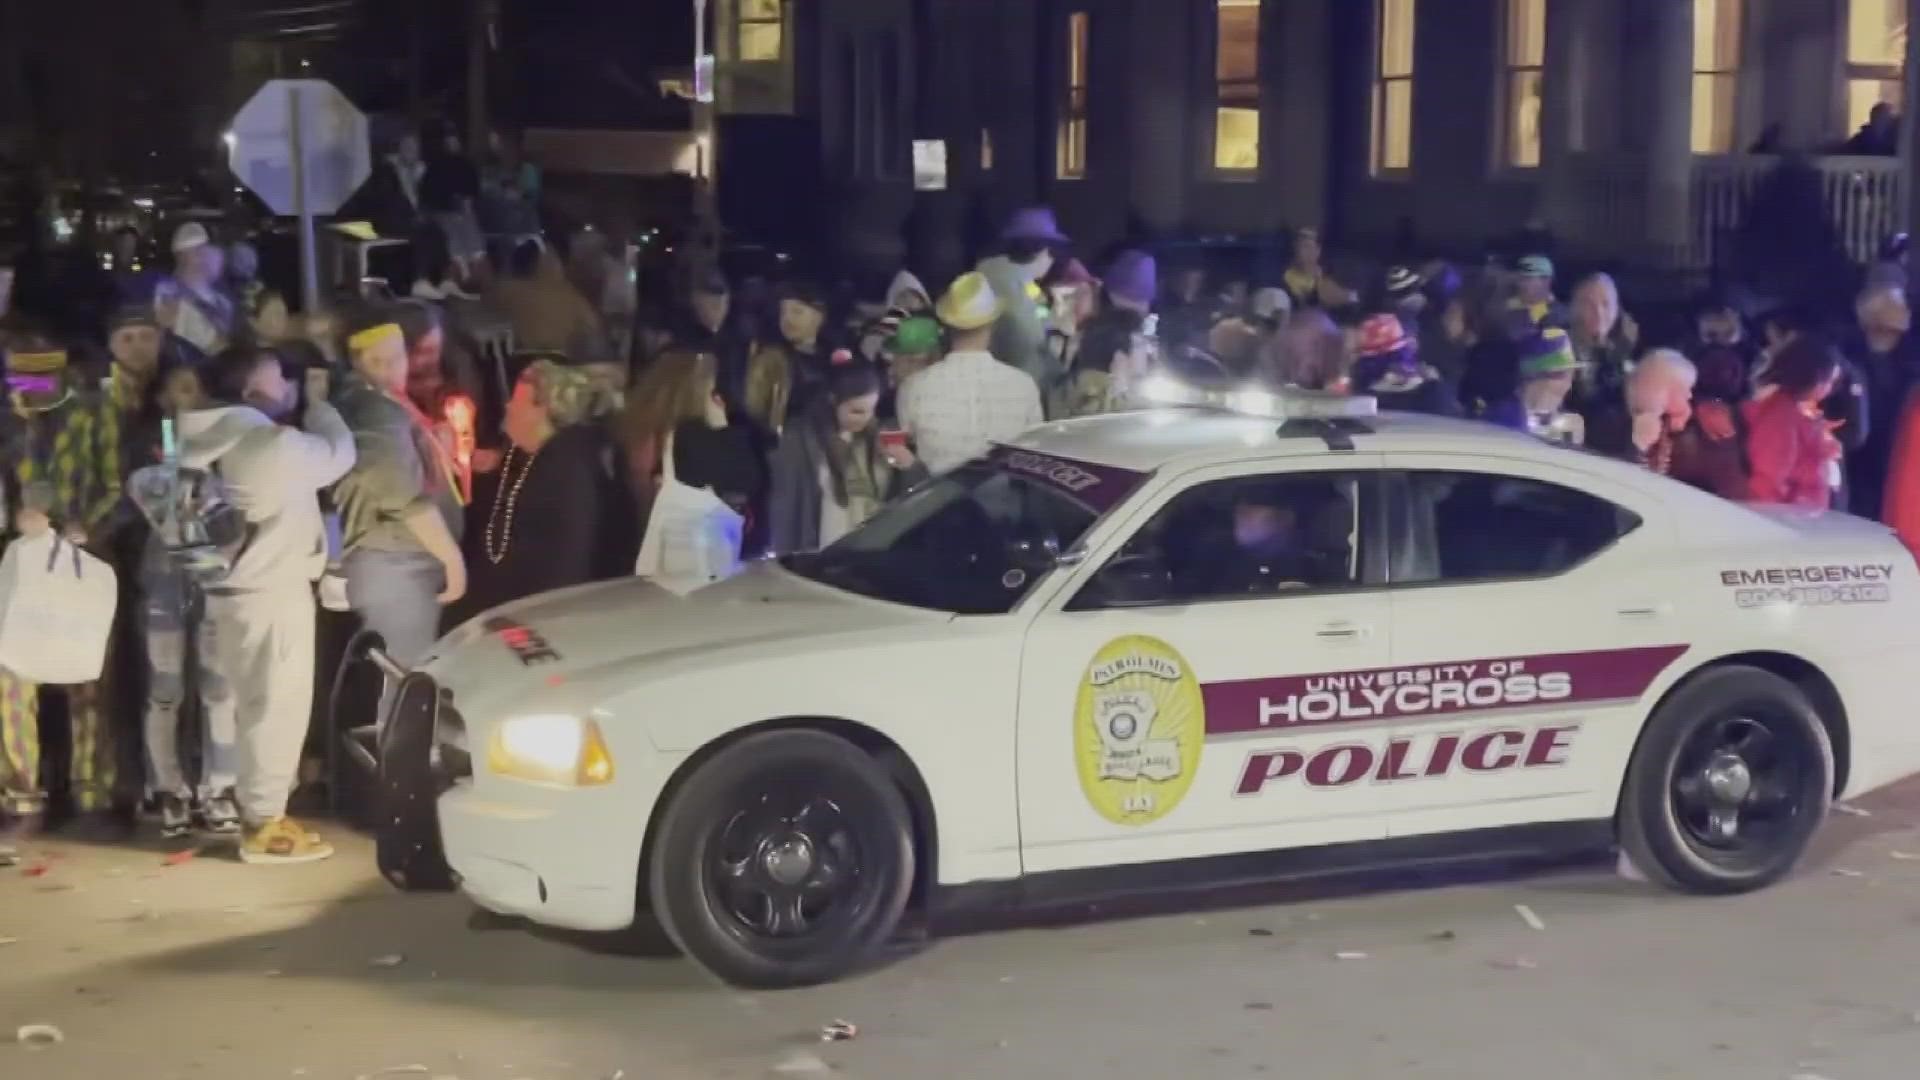 As carnival season rolls on, New Orleans law enforcement is trying to make sense of how many officers are needed and where they need to provide security.